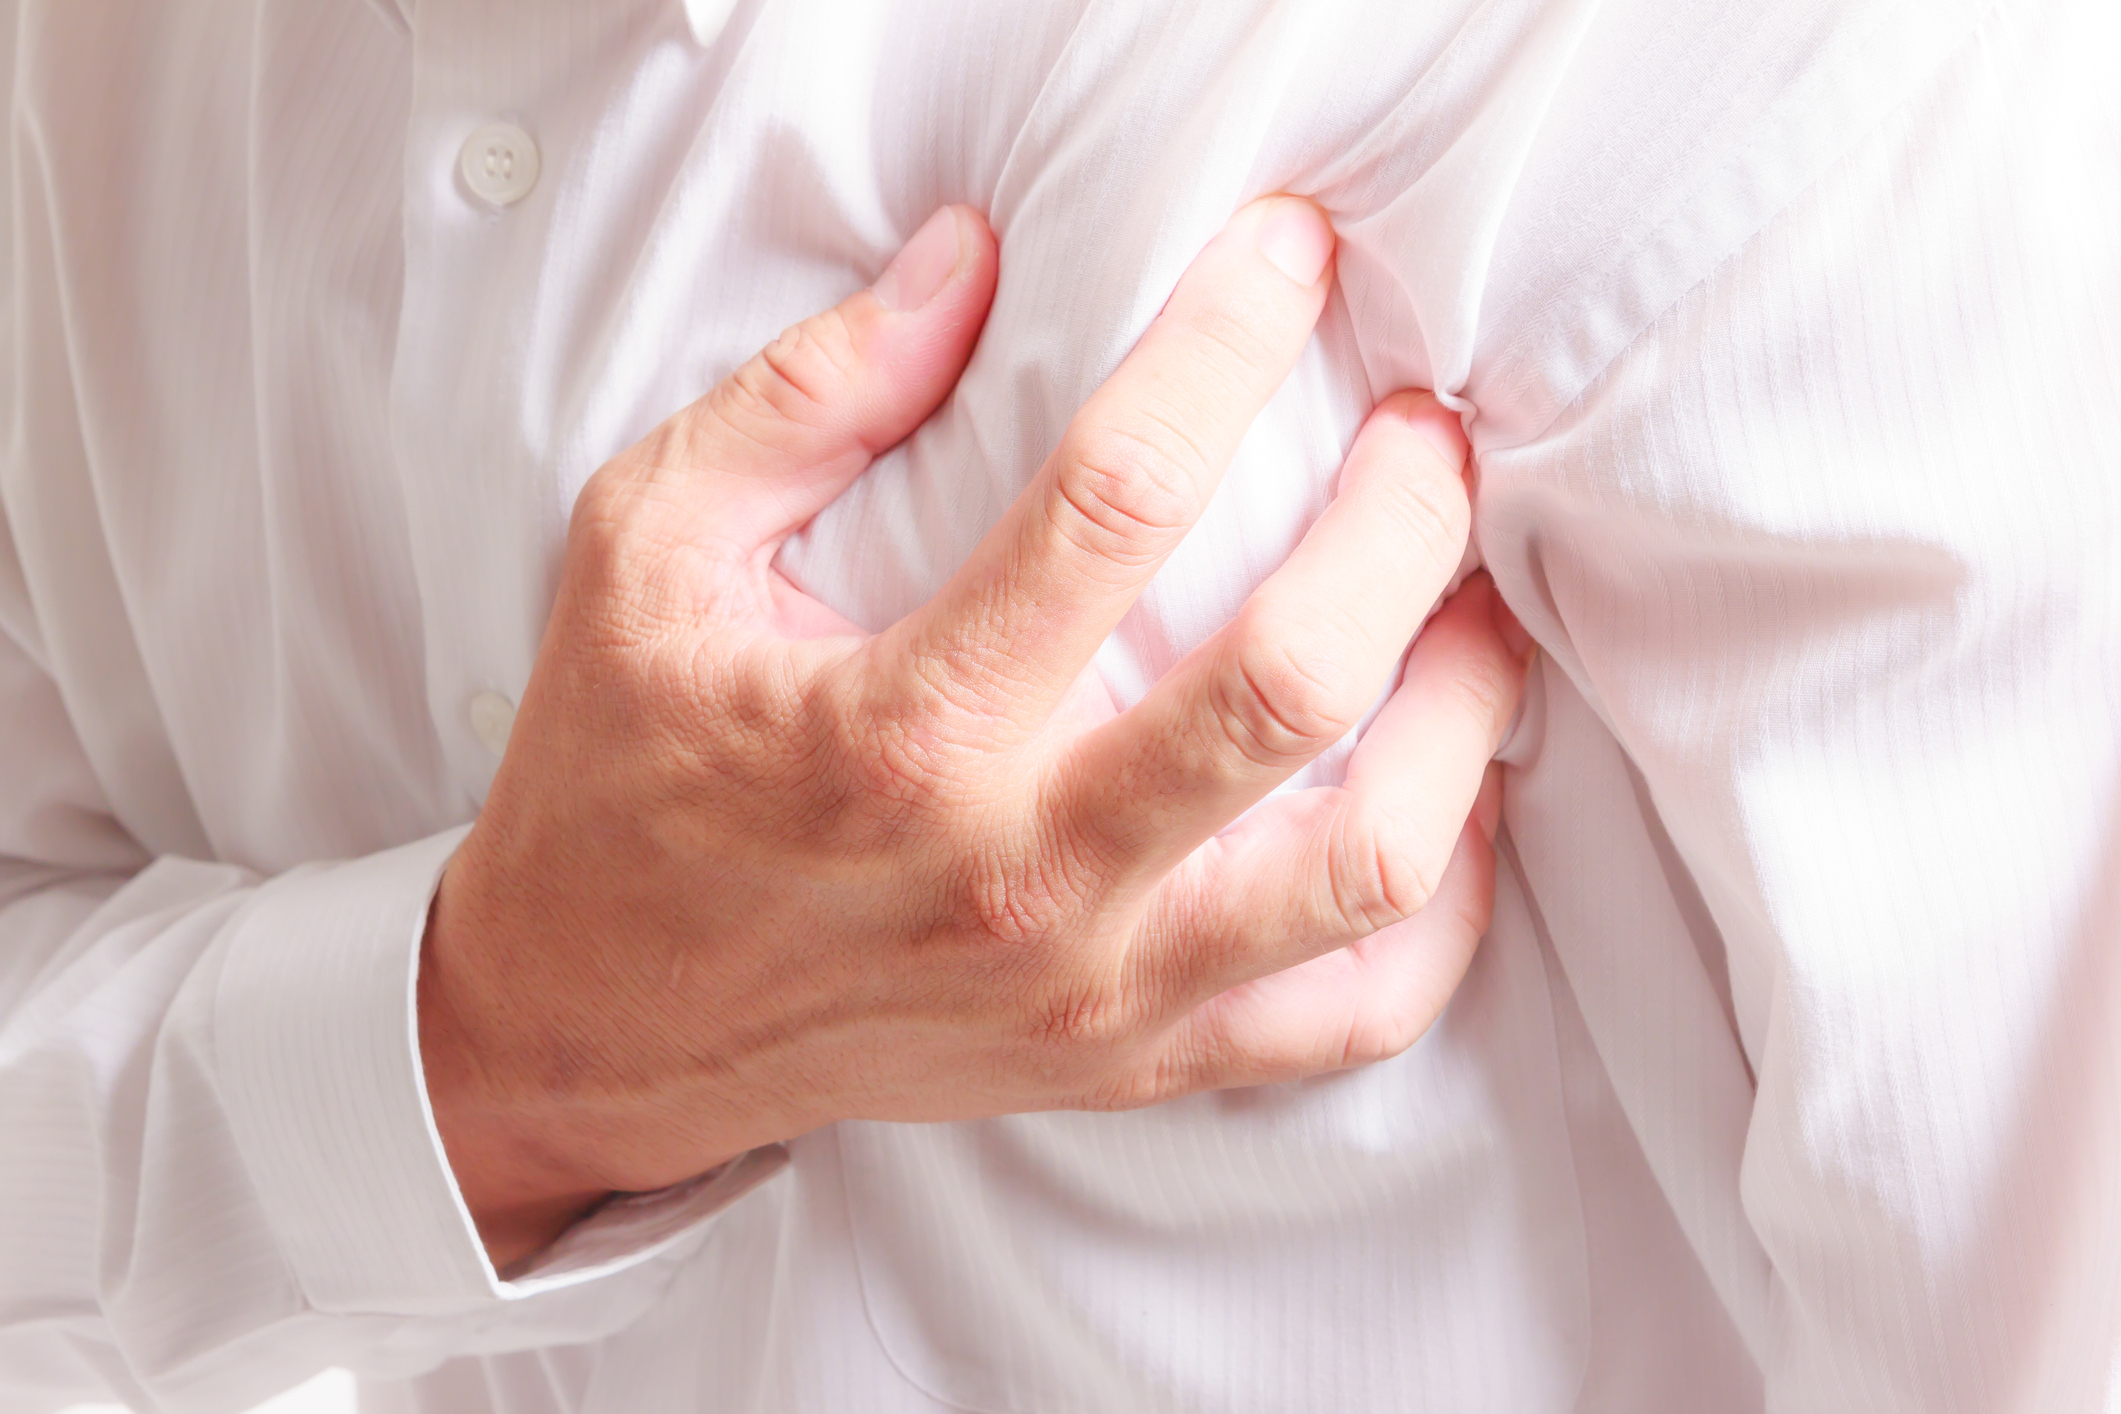 Heart attack and left arm pain: ...